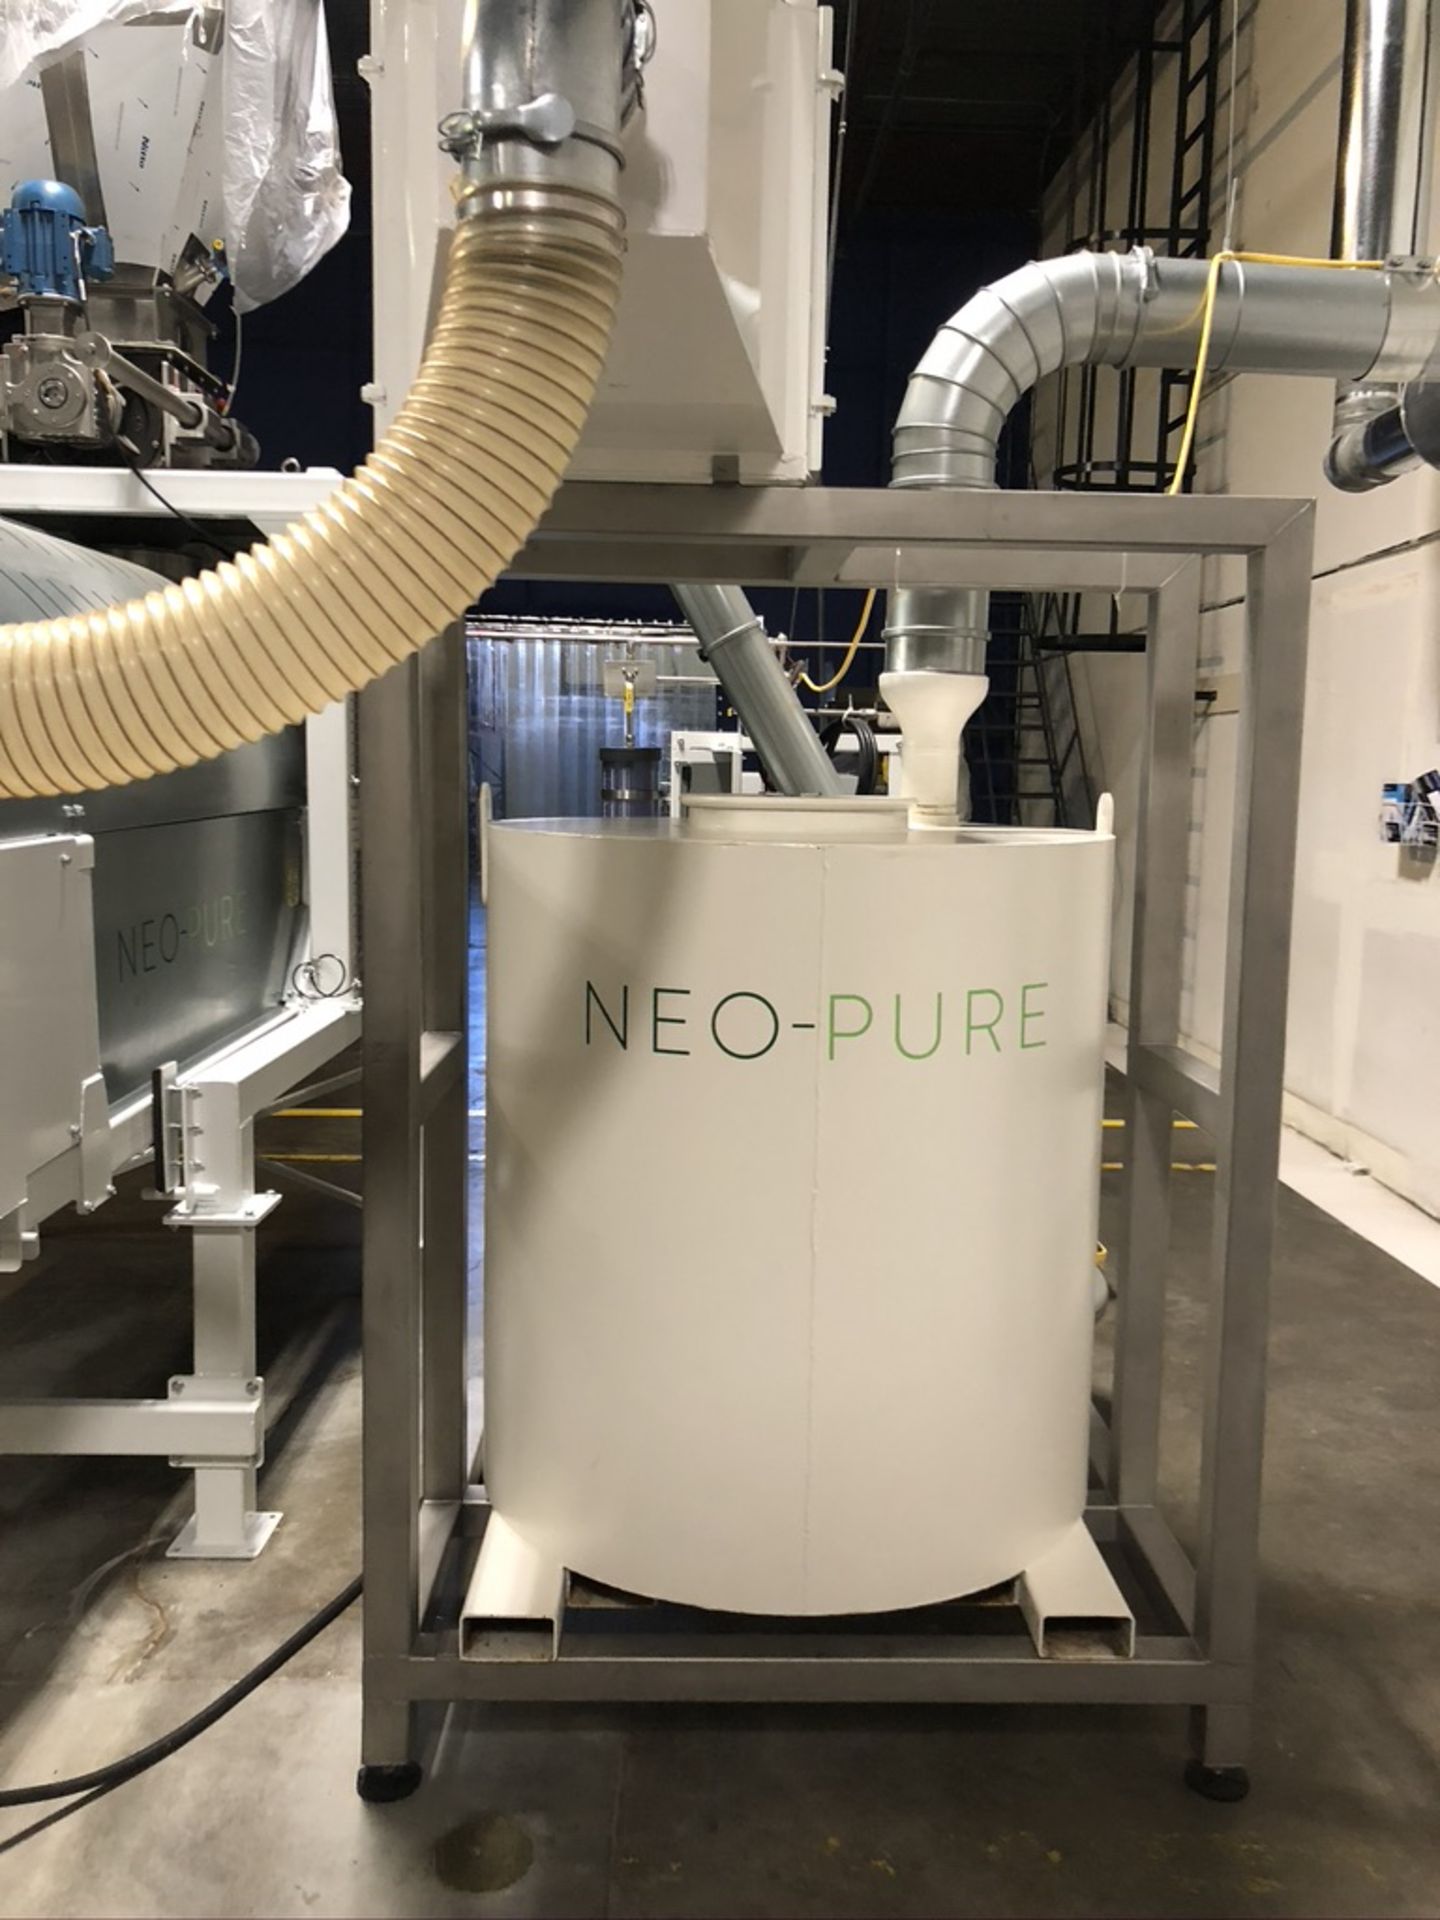 2018 Neo-Pure Seed, Nut, Grain & Hemp Pasteurizing and Drying System, Includes Neo-Pure Batch - Image 4 of 108